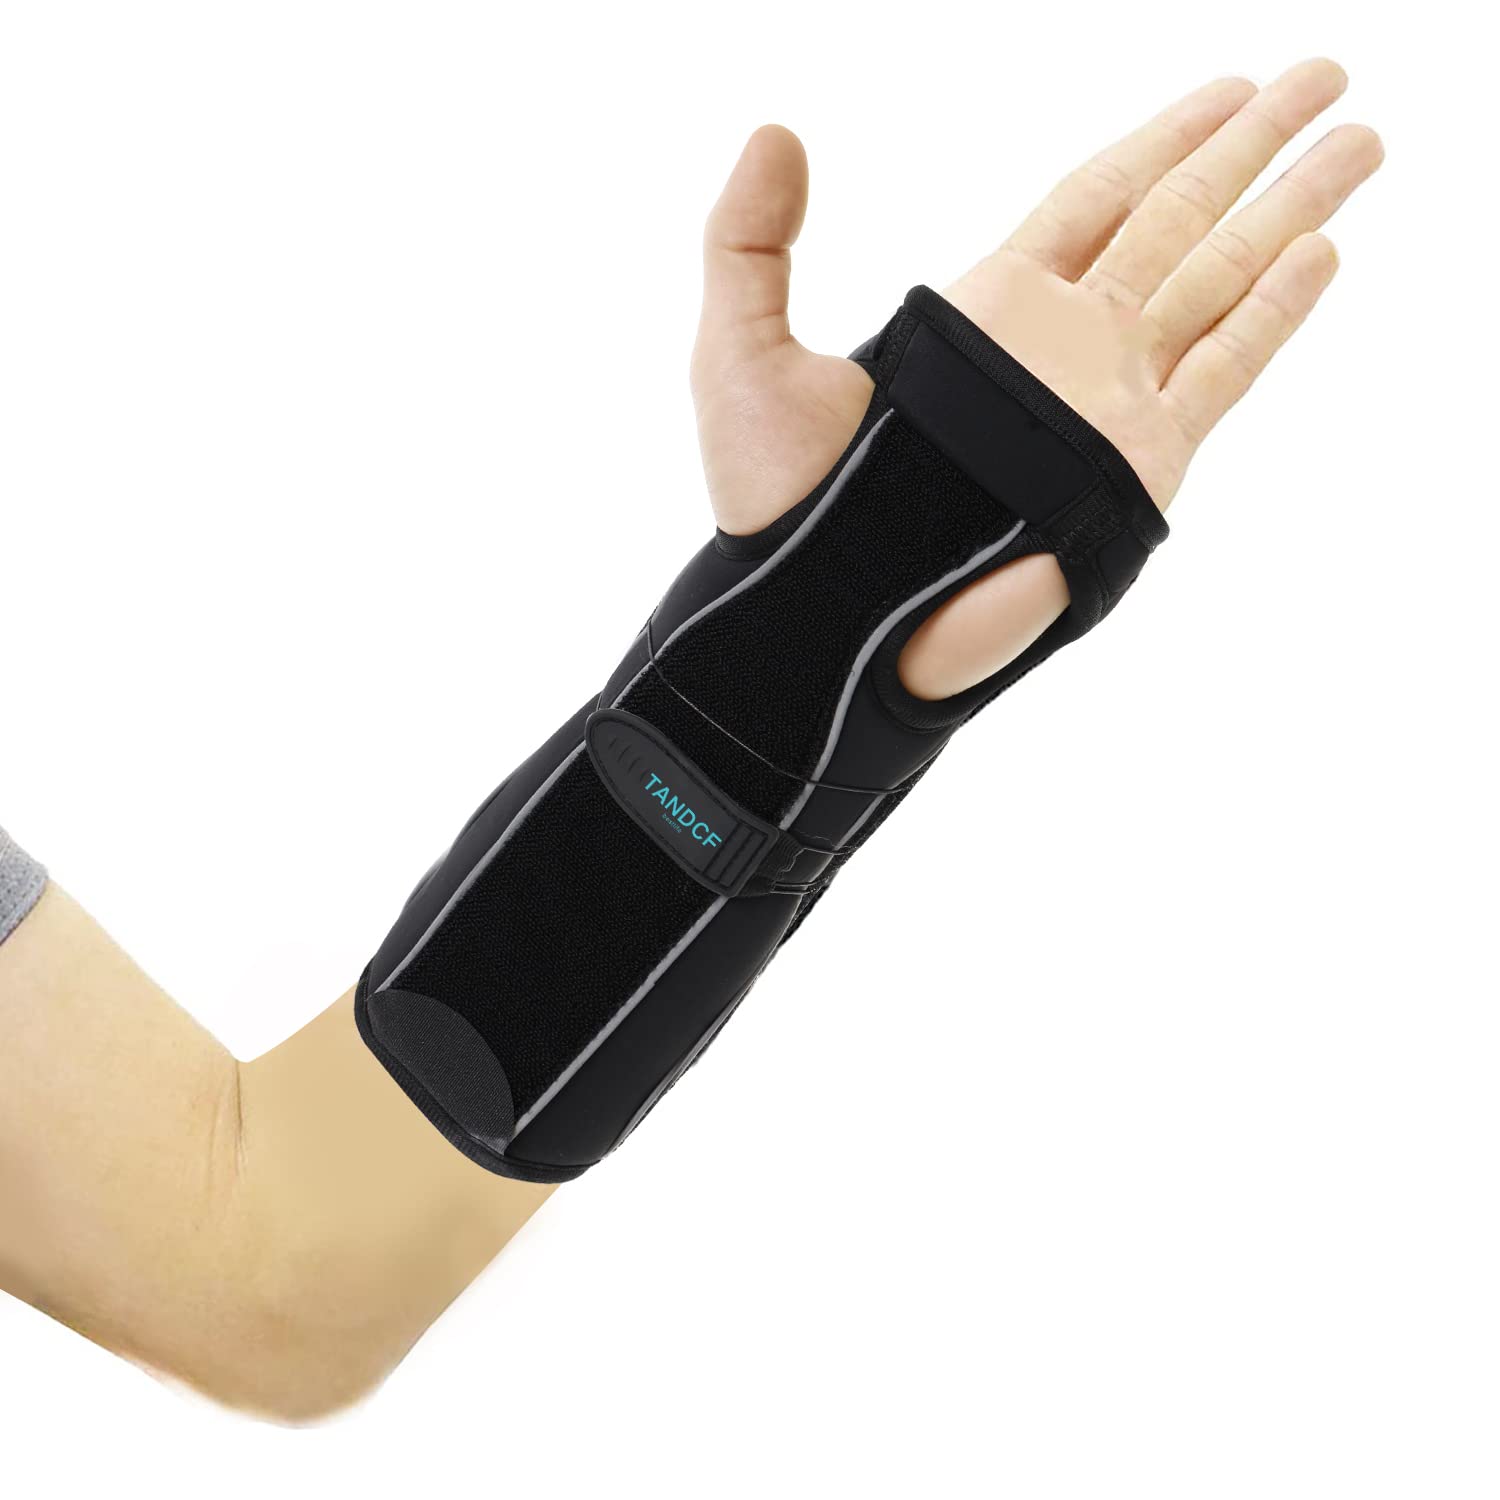 TANDCF bestlife Unisex Universal Forearm and Wrist Support Splint